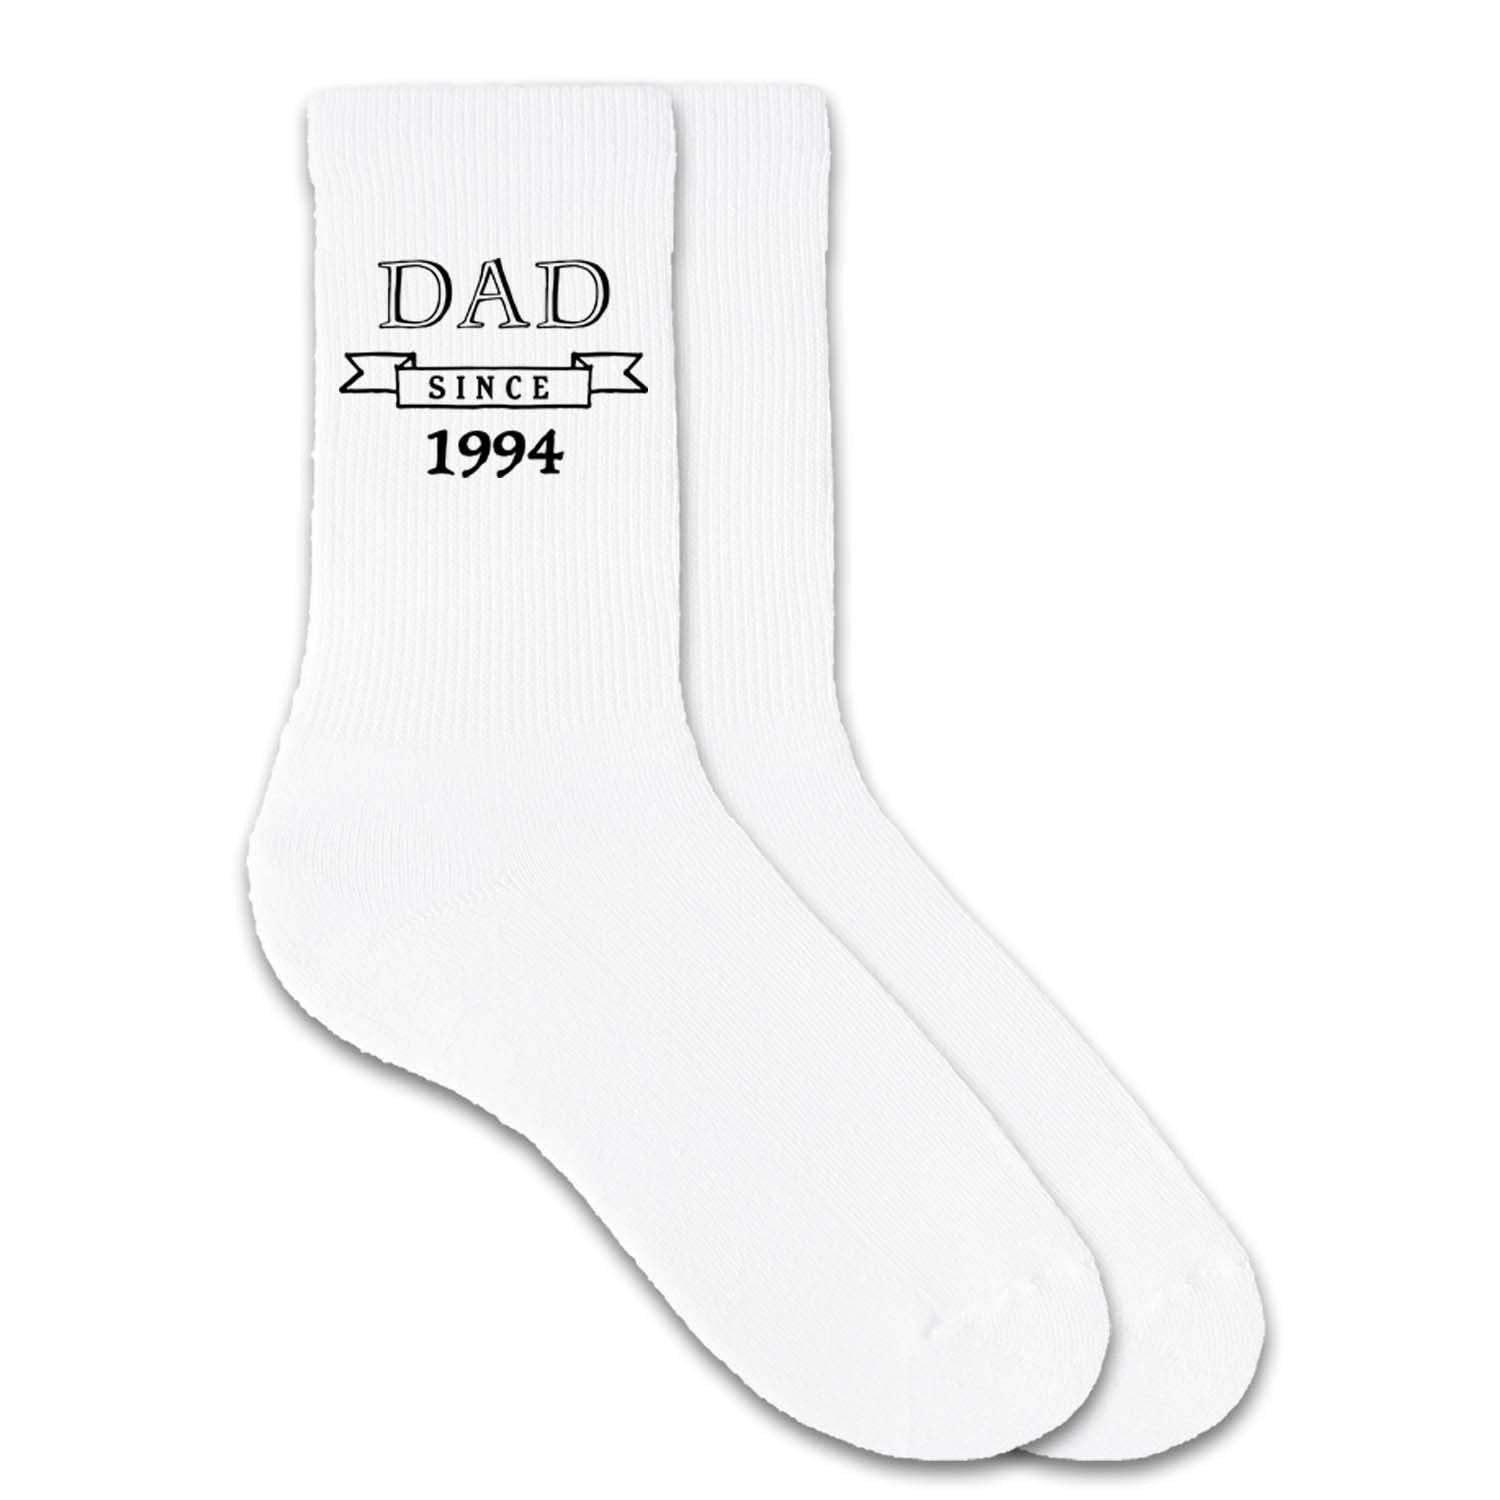 Personalized white crew socks for dad with the established date added to the design